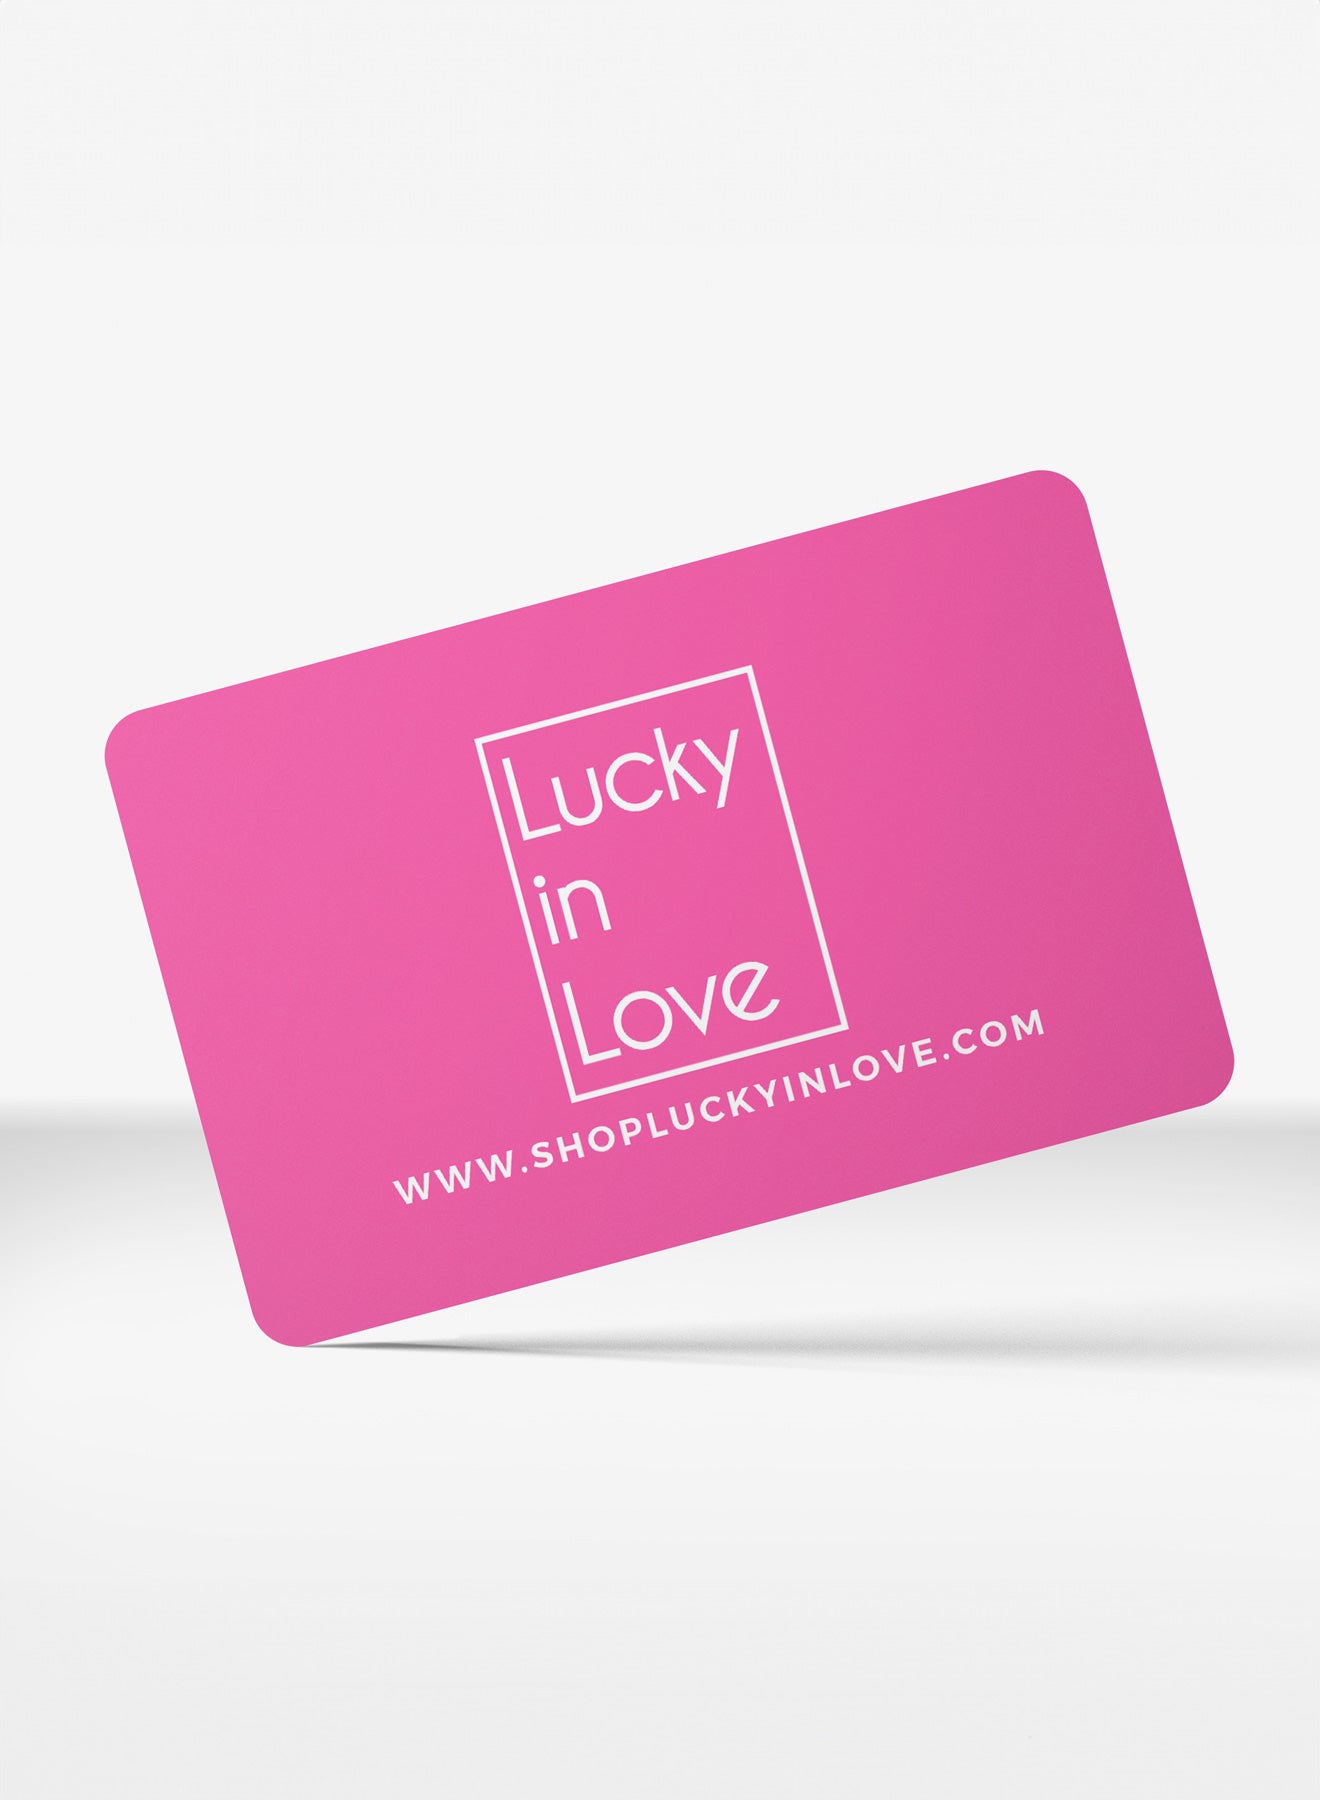 LUCKY-IN-LOVE-GIFT-CARD-PRODUCT_98caa459-b83b-4bc1-8cab-df8526d80bc4.jpg